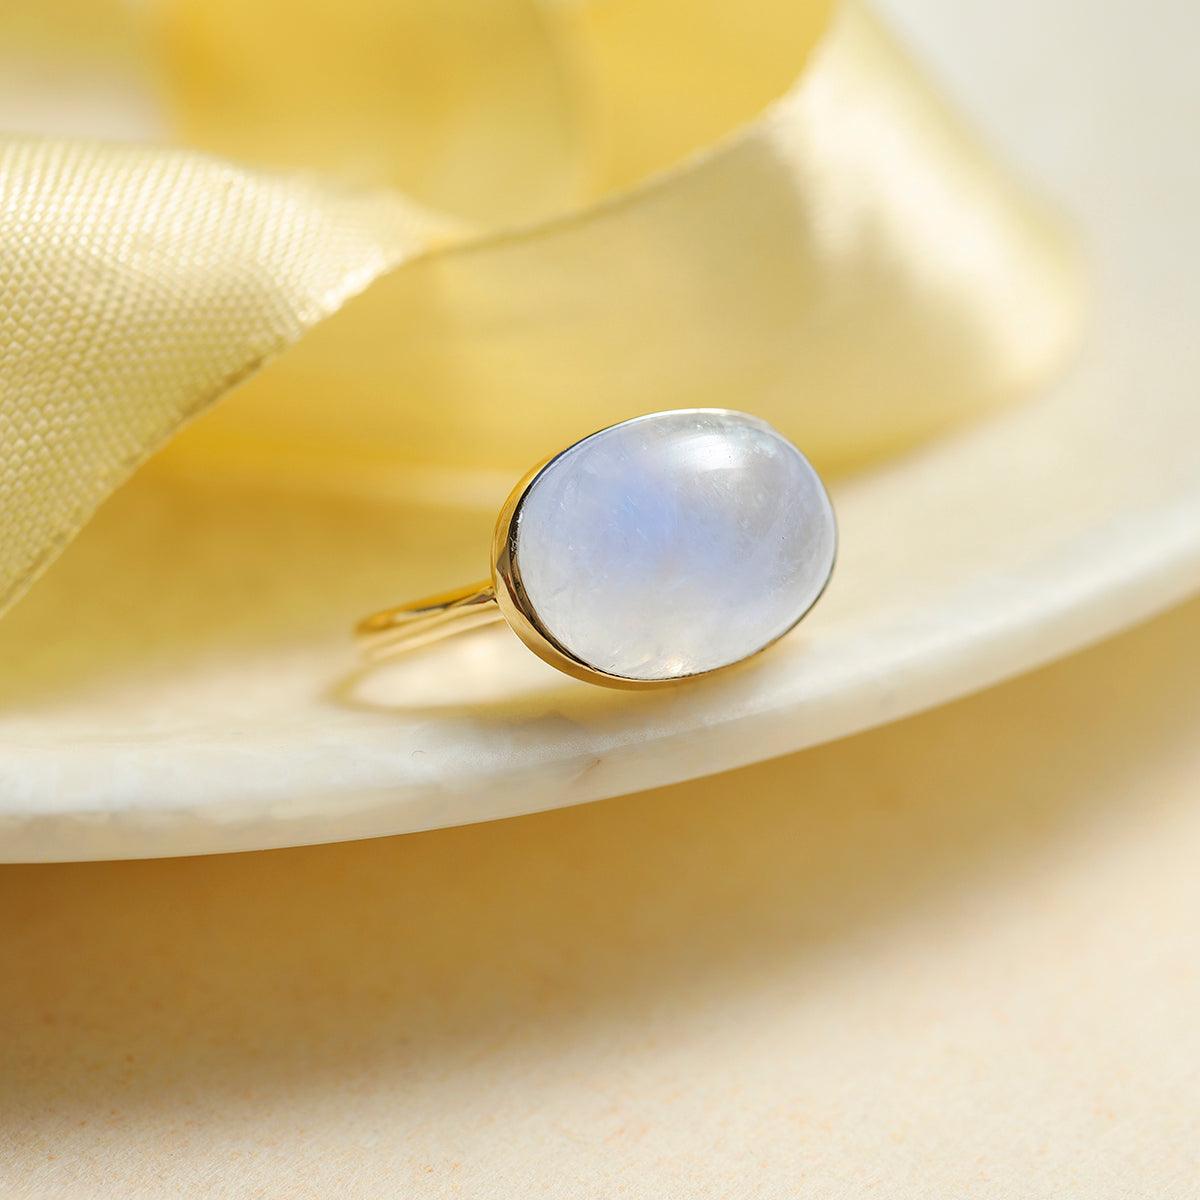 Rainbow Moonstone Solitaire Ring 14k Gold Over 925 Silver - YoTreasure